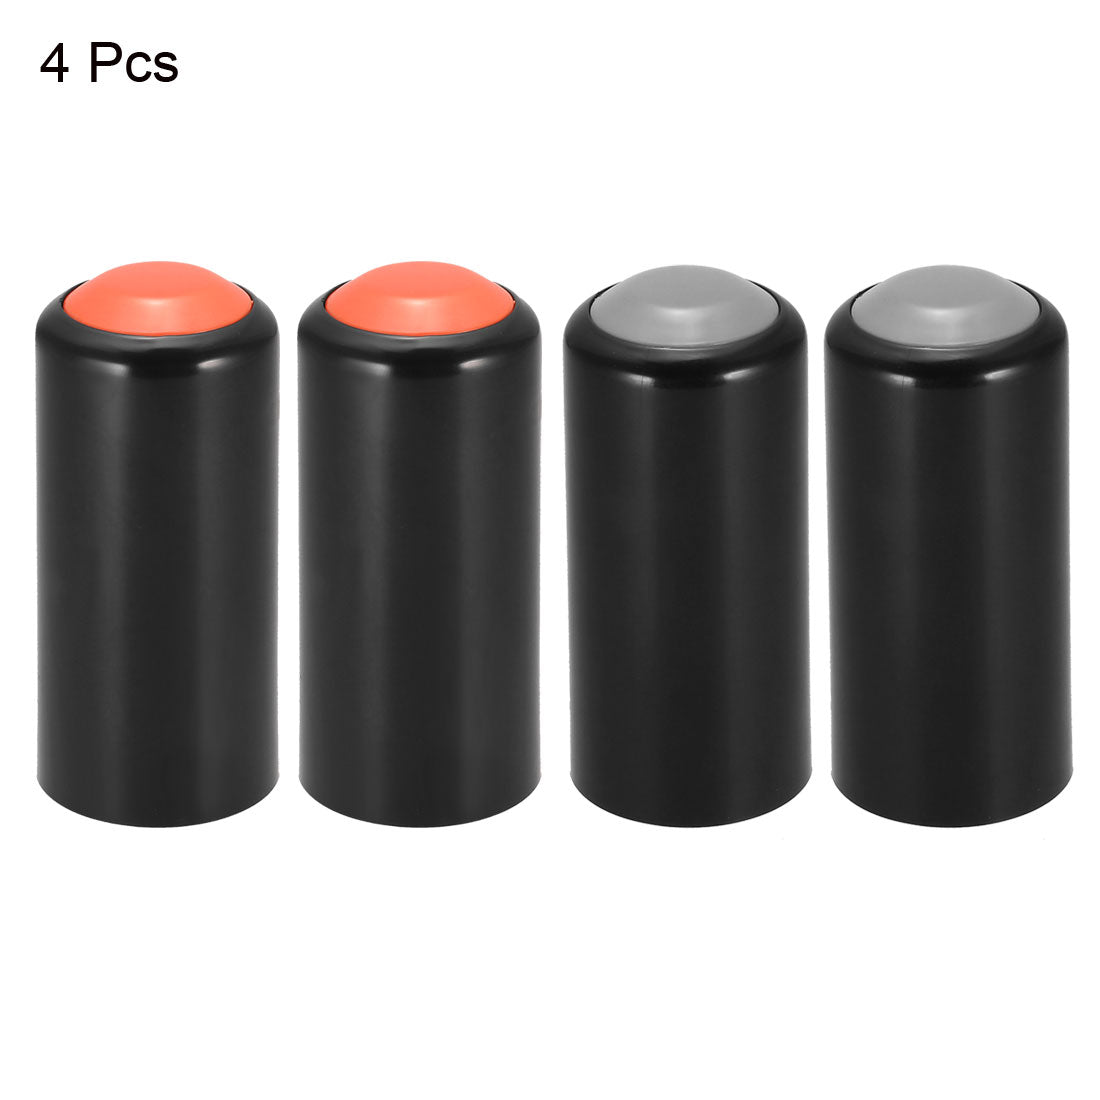 uxcell Uxcell Battery Cover Mic Battery Screw on Cap Cup Cover for PGX24 SLX24 PG58 SM58 BETA58 Wireless Orange Gray 4Pcs